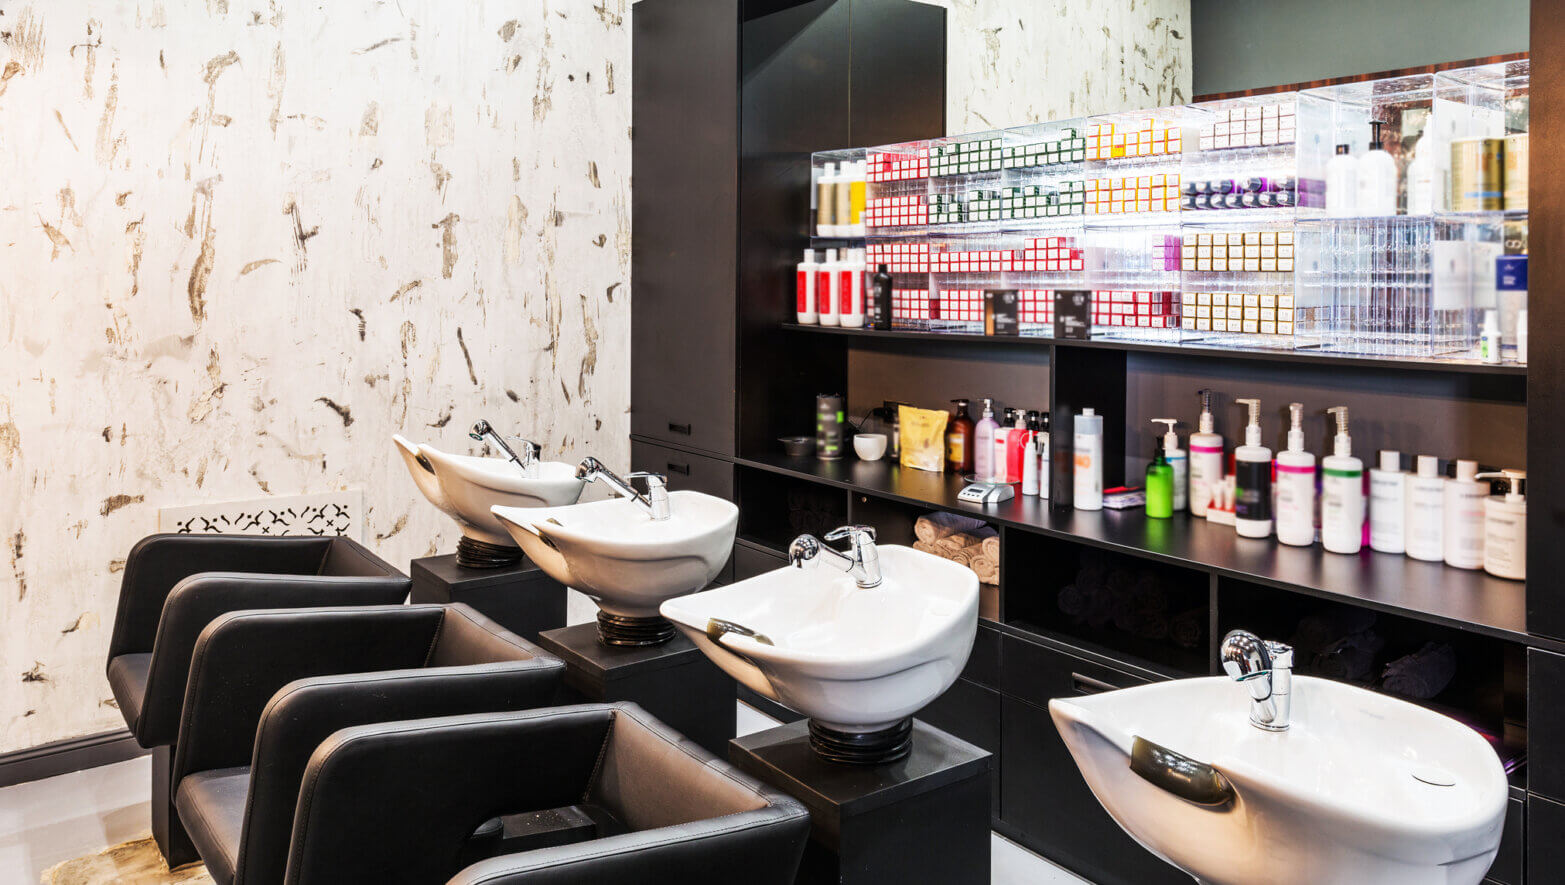 Image of a salon with hair care products and wash basin for hair